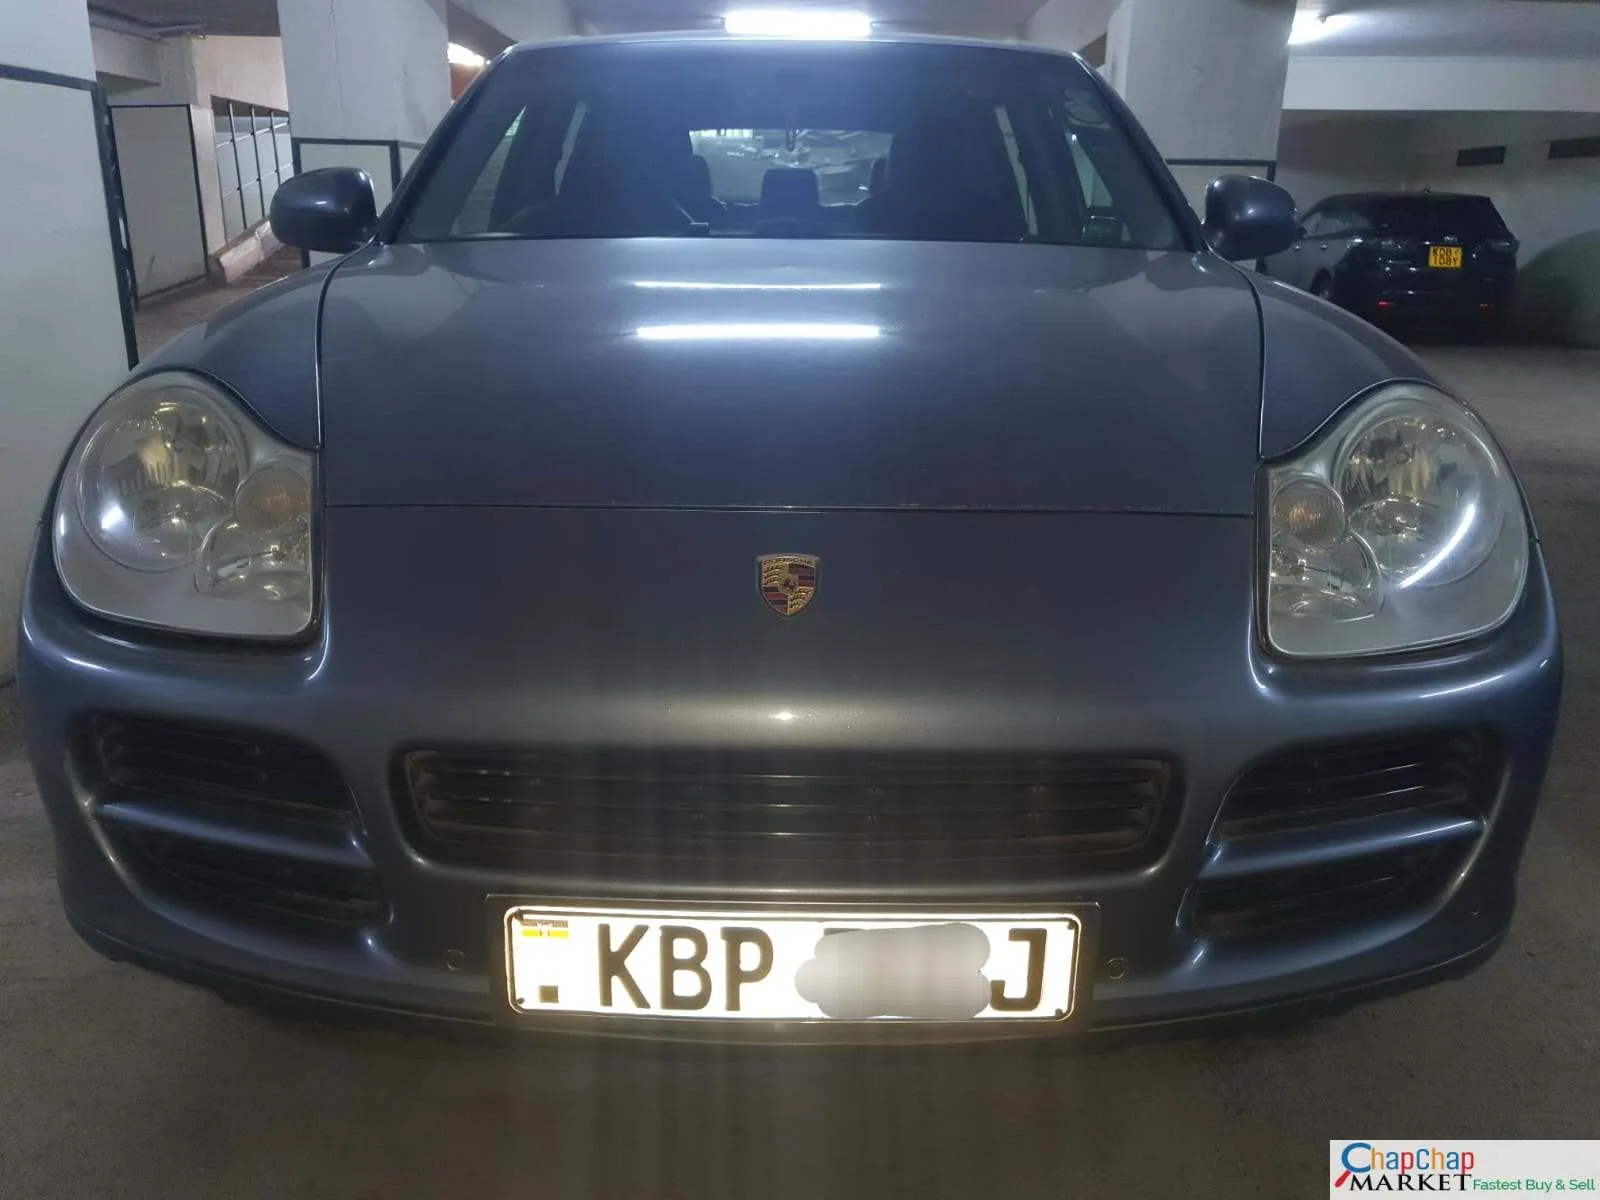 Porsche Cayenne You PAY 40% DEPOSIT Trade in OK cayenne for sale in kenya hire purchase installments EXCLUSIVE